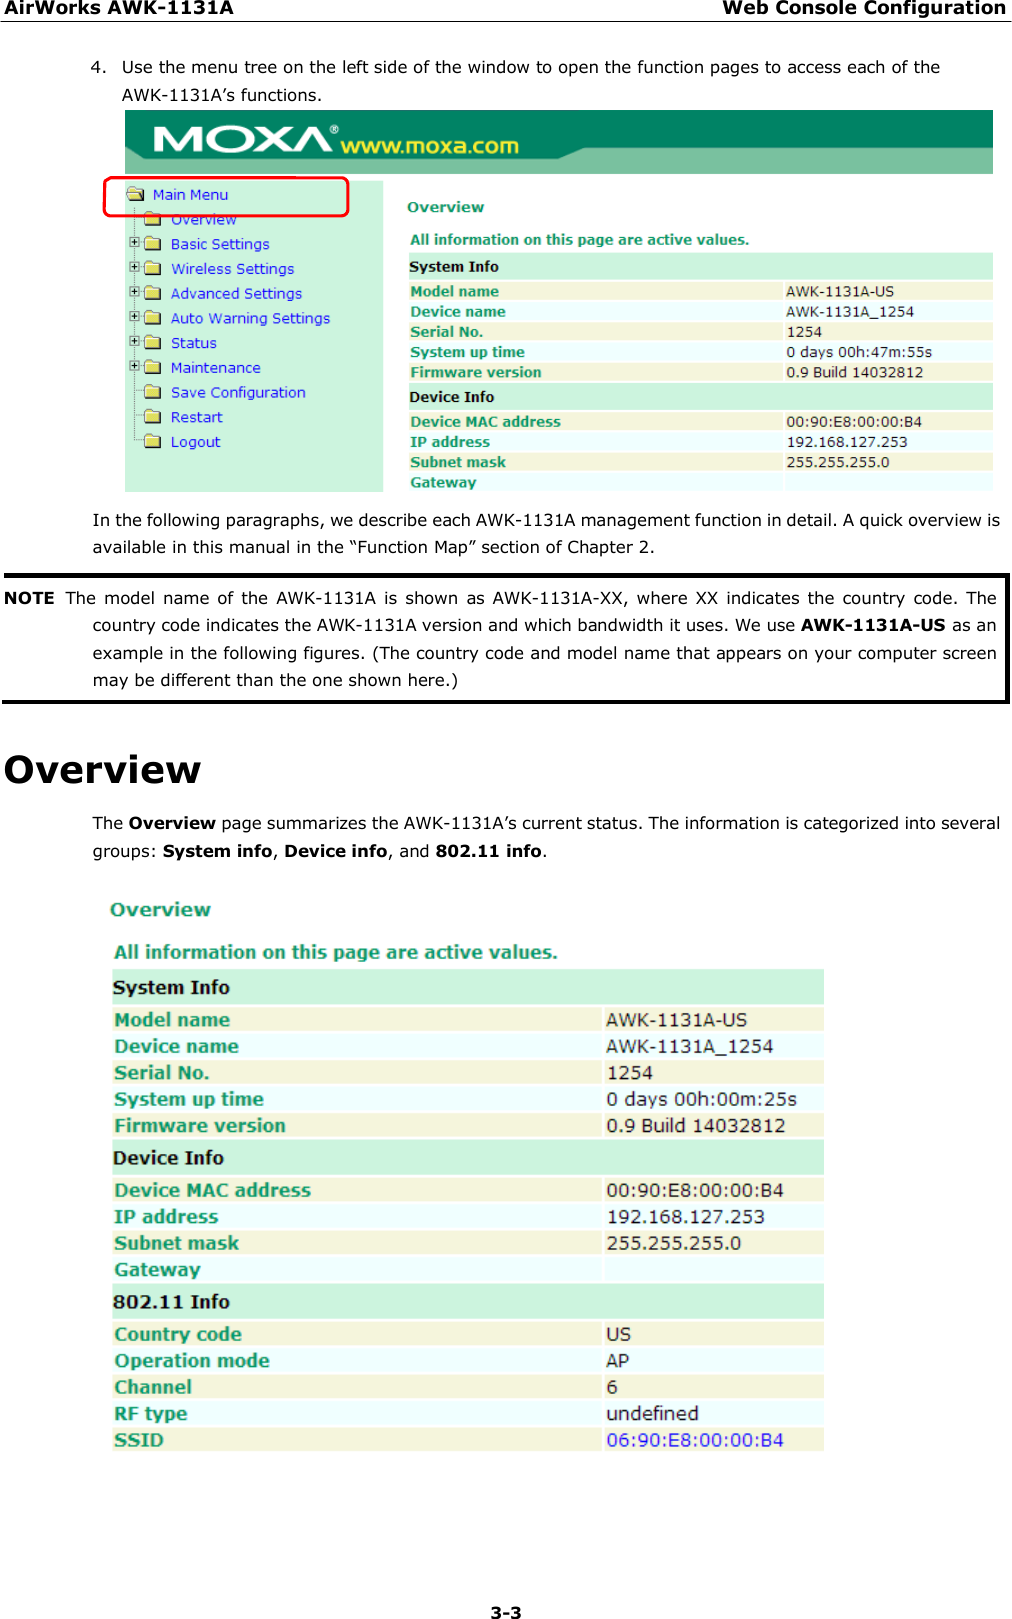 AirWorks AWK-1131A Web Console Configuration 3-3    4. Use the menu tree on the left side of the window to open the function pages to access each of the AWK-1131A’s functions.                    In the following paragraphs, we describe each AWK-1131A management function in detail. A quick overview is available in this manual in the “Function Map” section of Chapter 2.  NOTE  The  model name  of the  AWK-1131A is  shown as  AWK-1131A-XX, where  XX  indicates the country  code. The country code indicates the AWK-1131A version and which bandwidth it uses. We use AWK-1131A-US as an example in the following figures. (The country code and model name that appears on your computer screen may be different than the one shown here.)   Overview  The Overview page summarizes the AWK-1131A’s current status. The information is categorized into several groups: System info, Device info, and 802.11 info.   